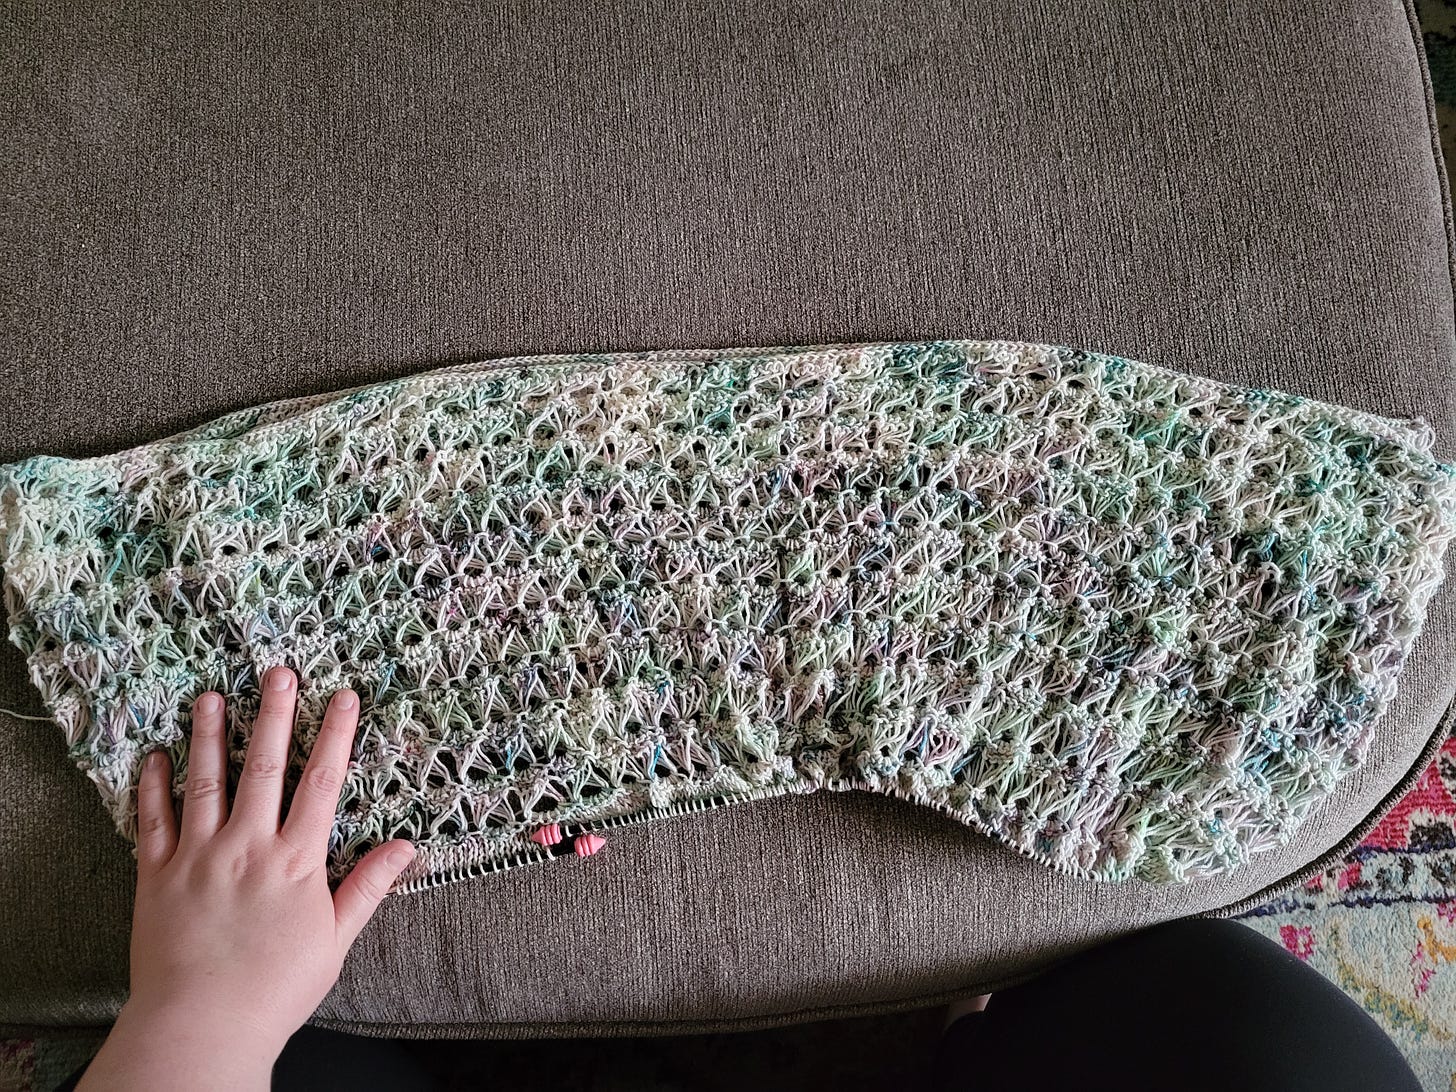 A panel of knitted broomstick lace in a watercolor-style variegated yarn in greens, blues, purples, and white. The panel is spread out on a gray ottoman and a white woman's hand is on top of it.